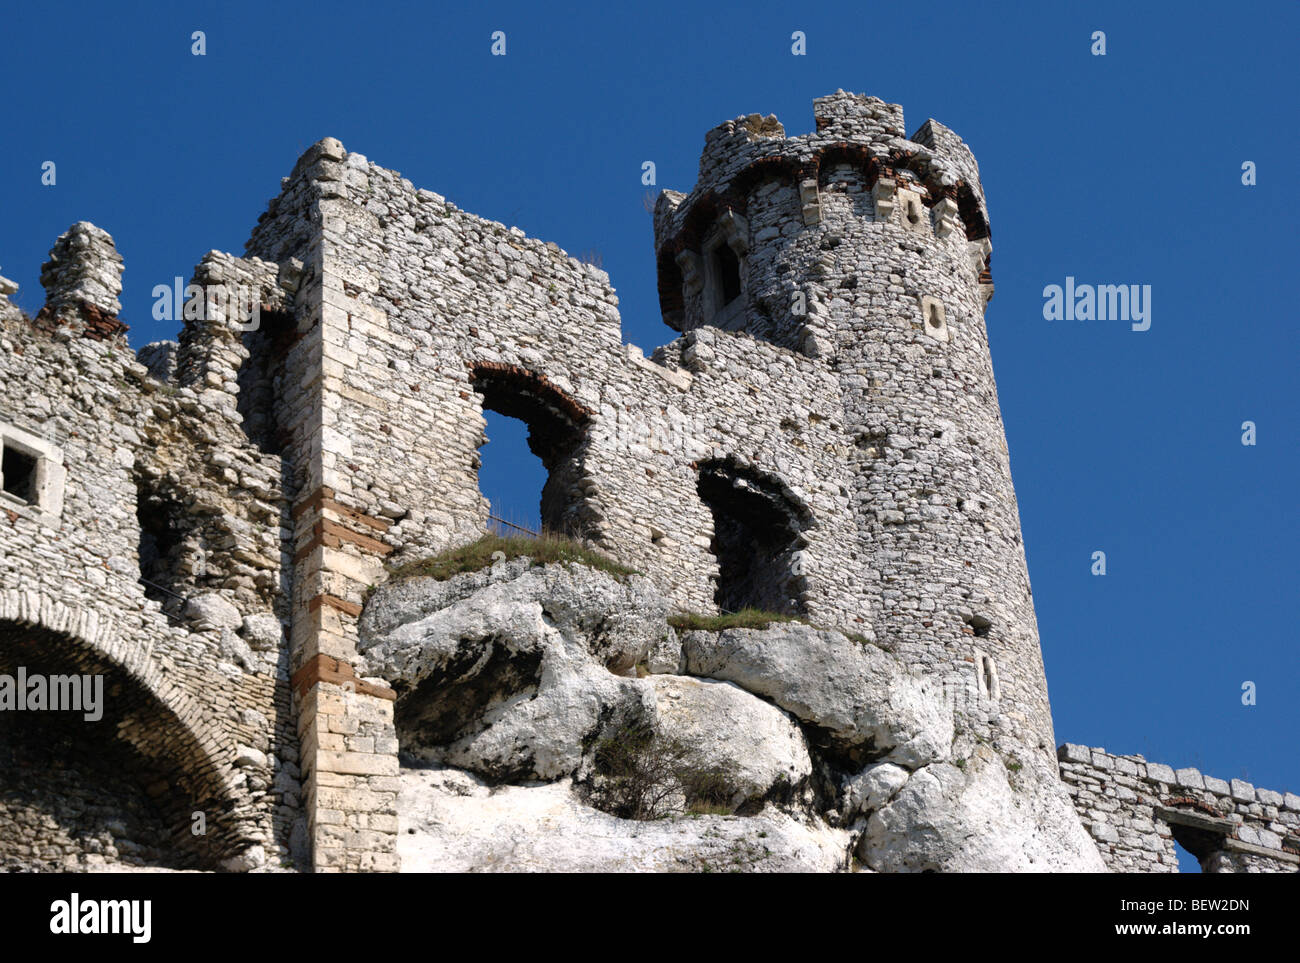 Ruins of castle from middle ages Ogrodzieniec, Poland Stock Photo